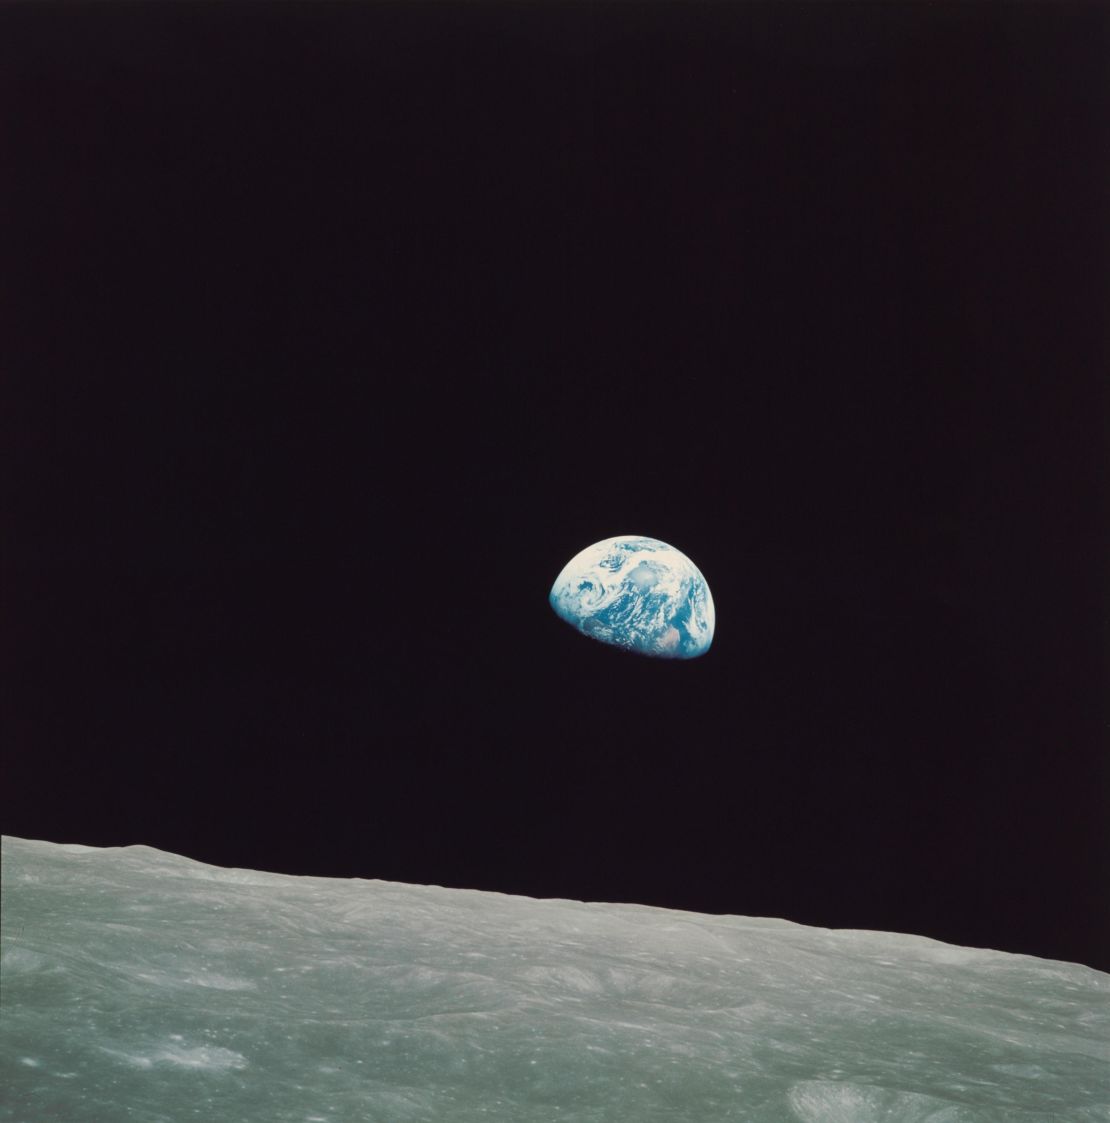 Engineer and astronaut William Anders participated in the Apollo 8 flight, which made the first manned voyage around the moon. Anders photographed the trip relentlessly, producing this iconic image of the Earth from space. 